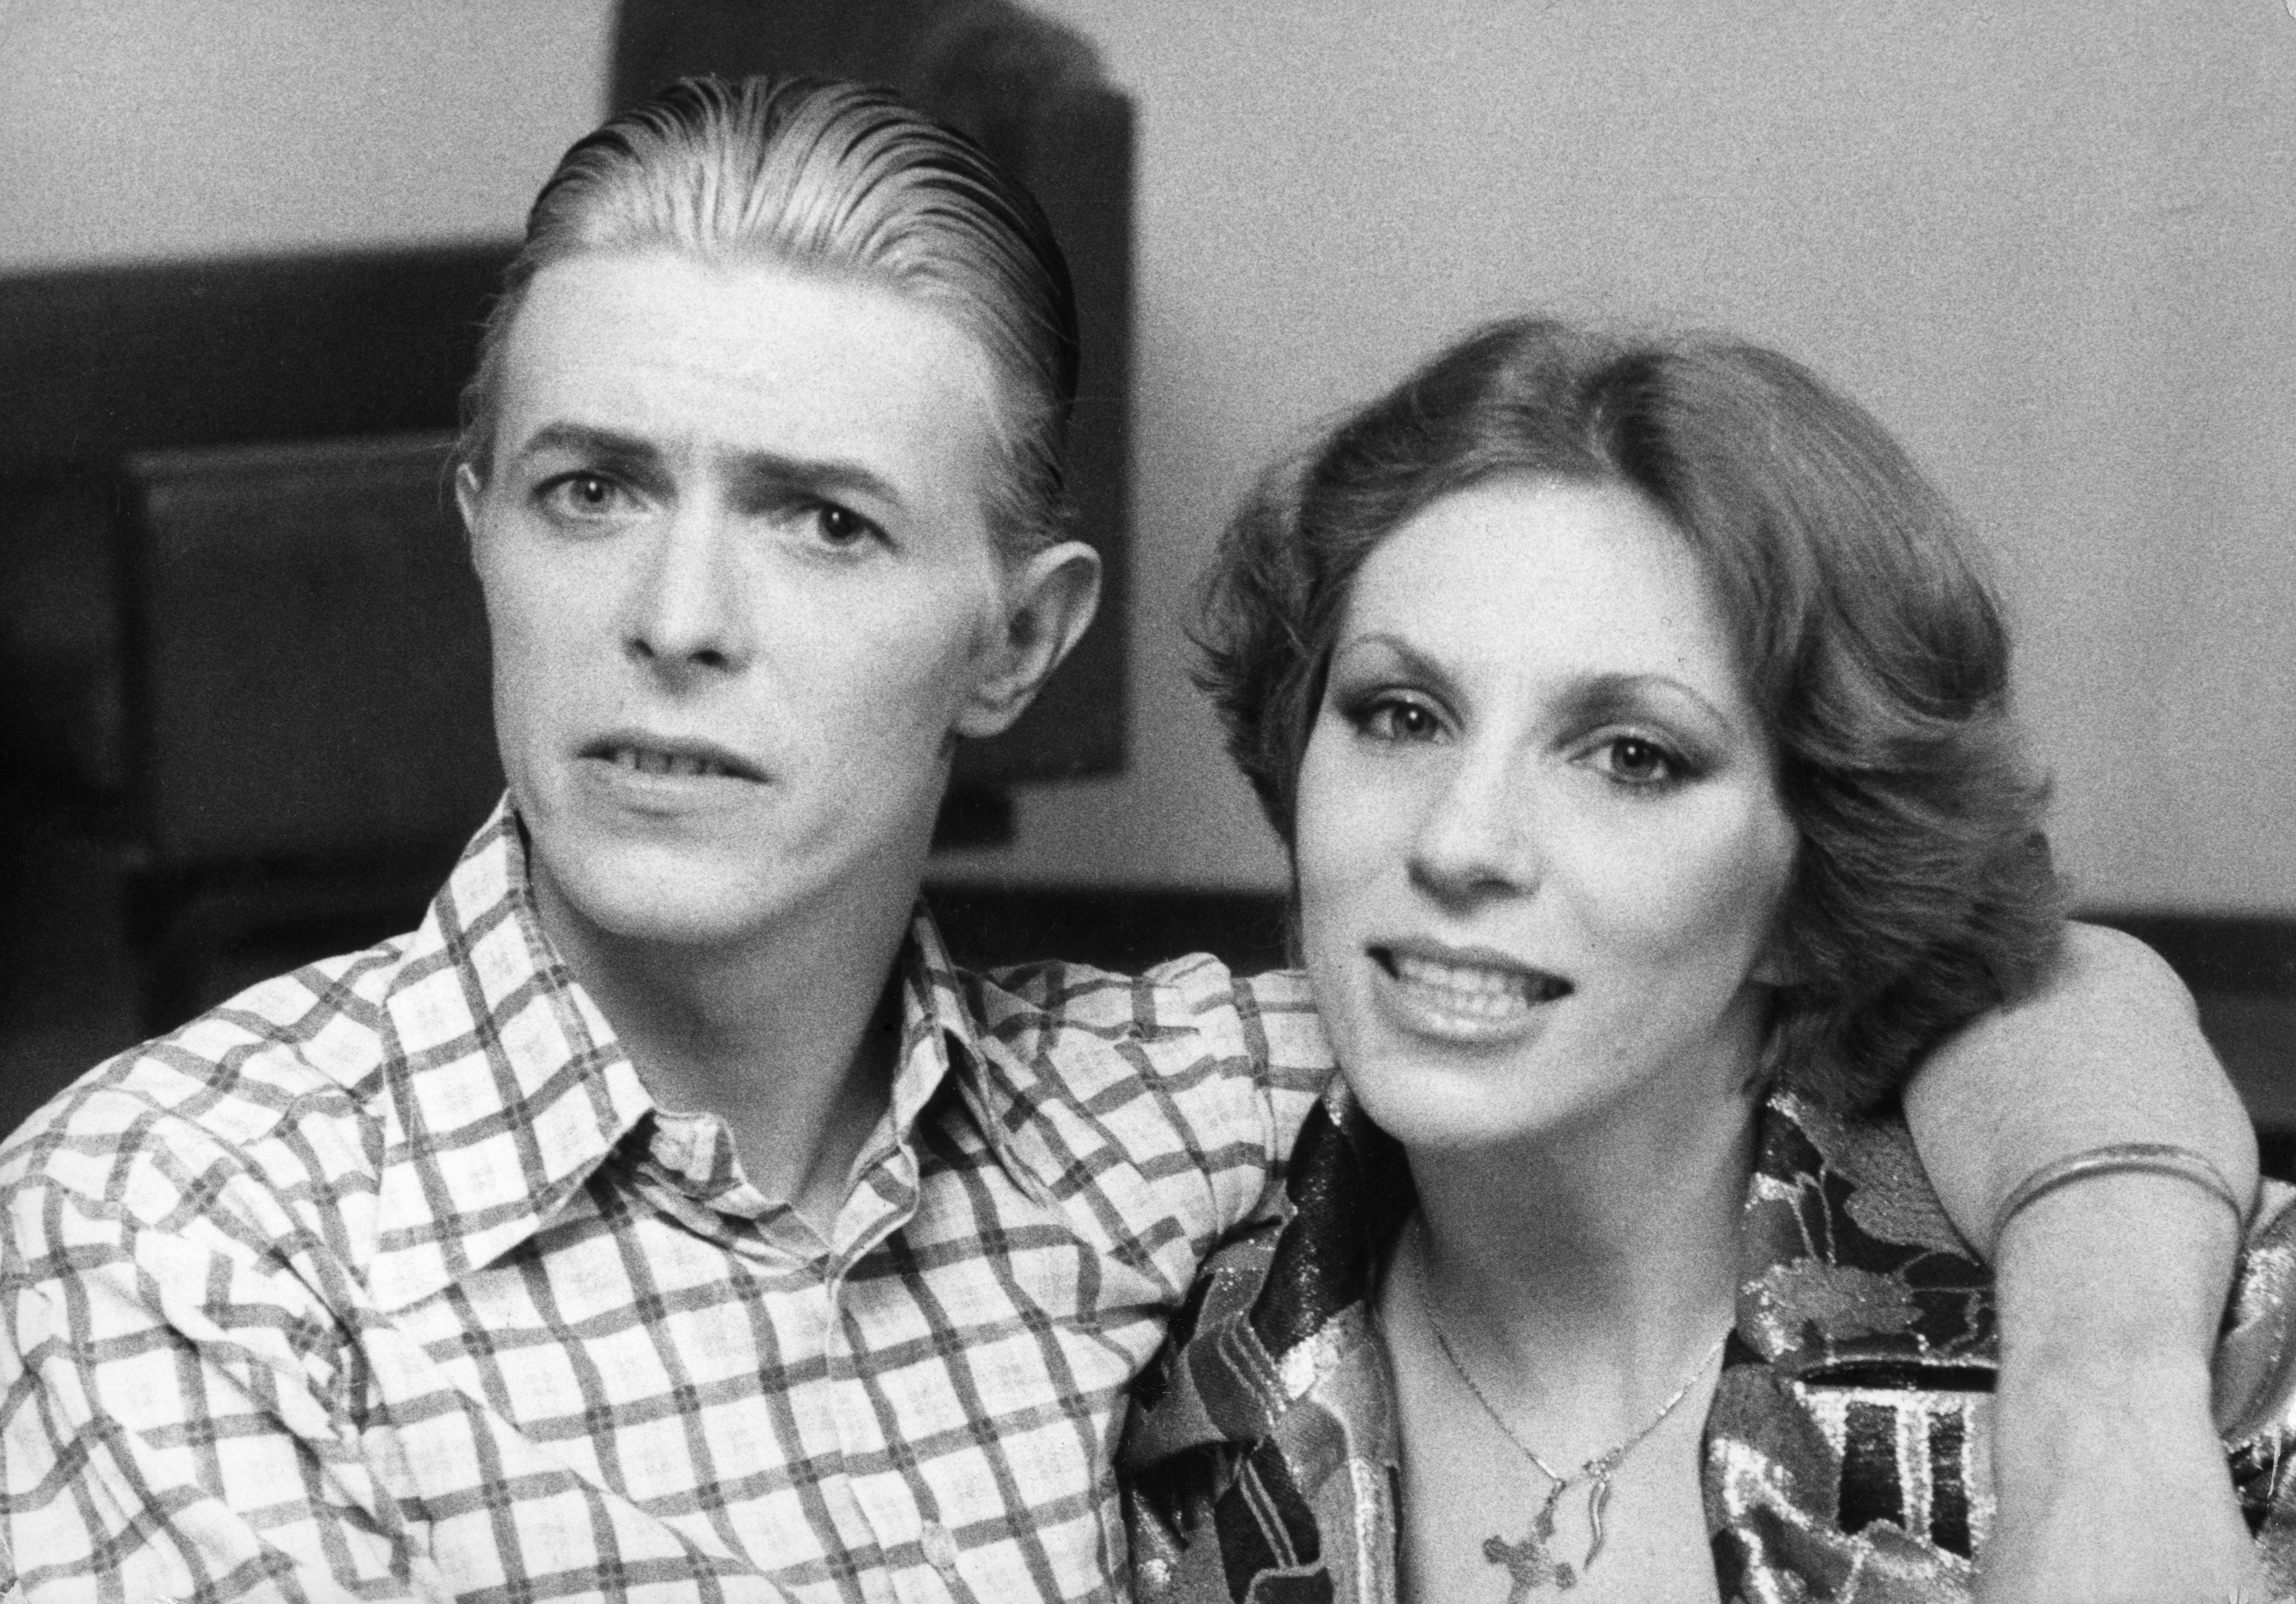 David Bowie with Angie Bowie during a visit to London in 1976 | Photo: Peter Stone/Mirrorpix/Getty Images